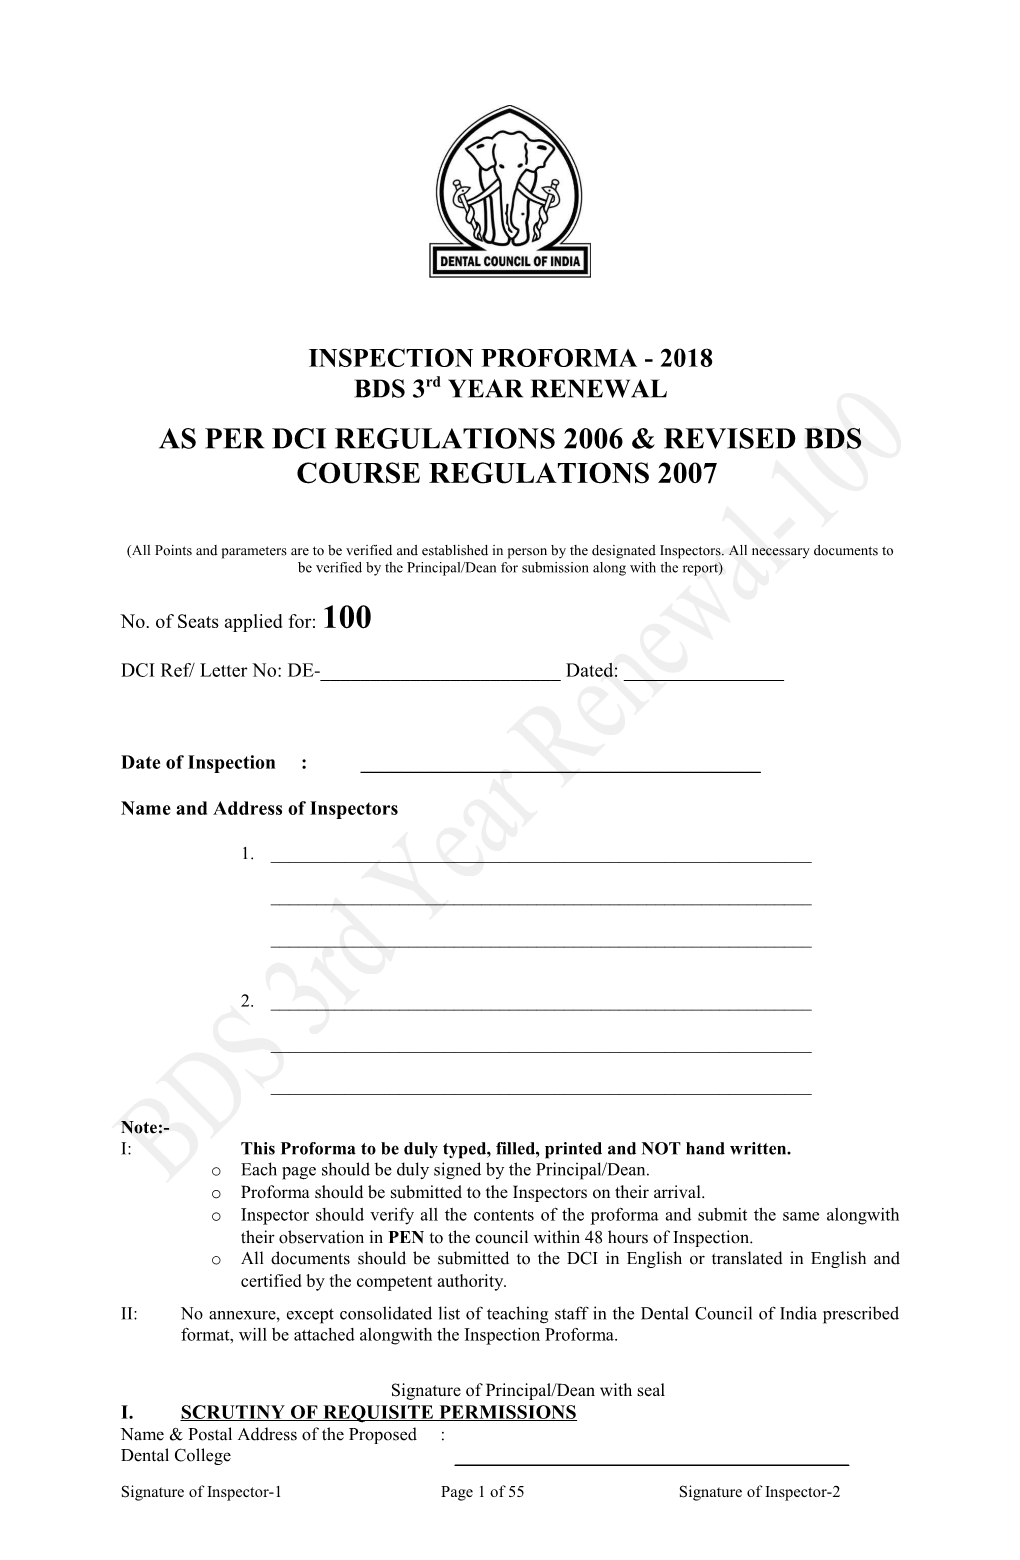 As Per Dci Regulations 2006 & Revised Bds Course Regulations 2007